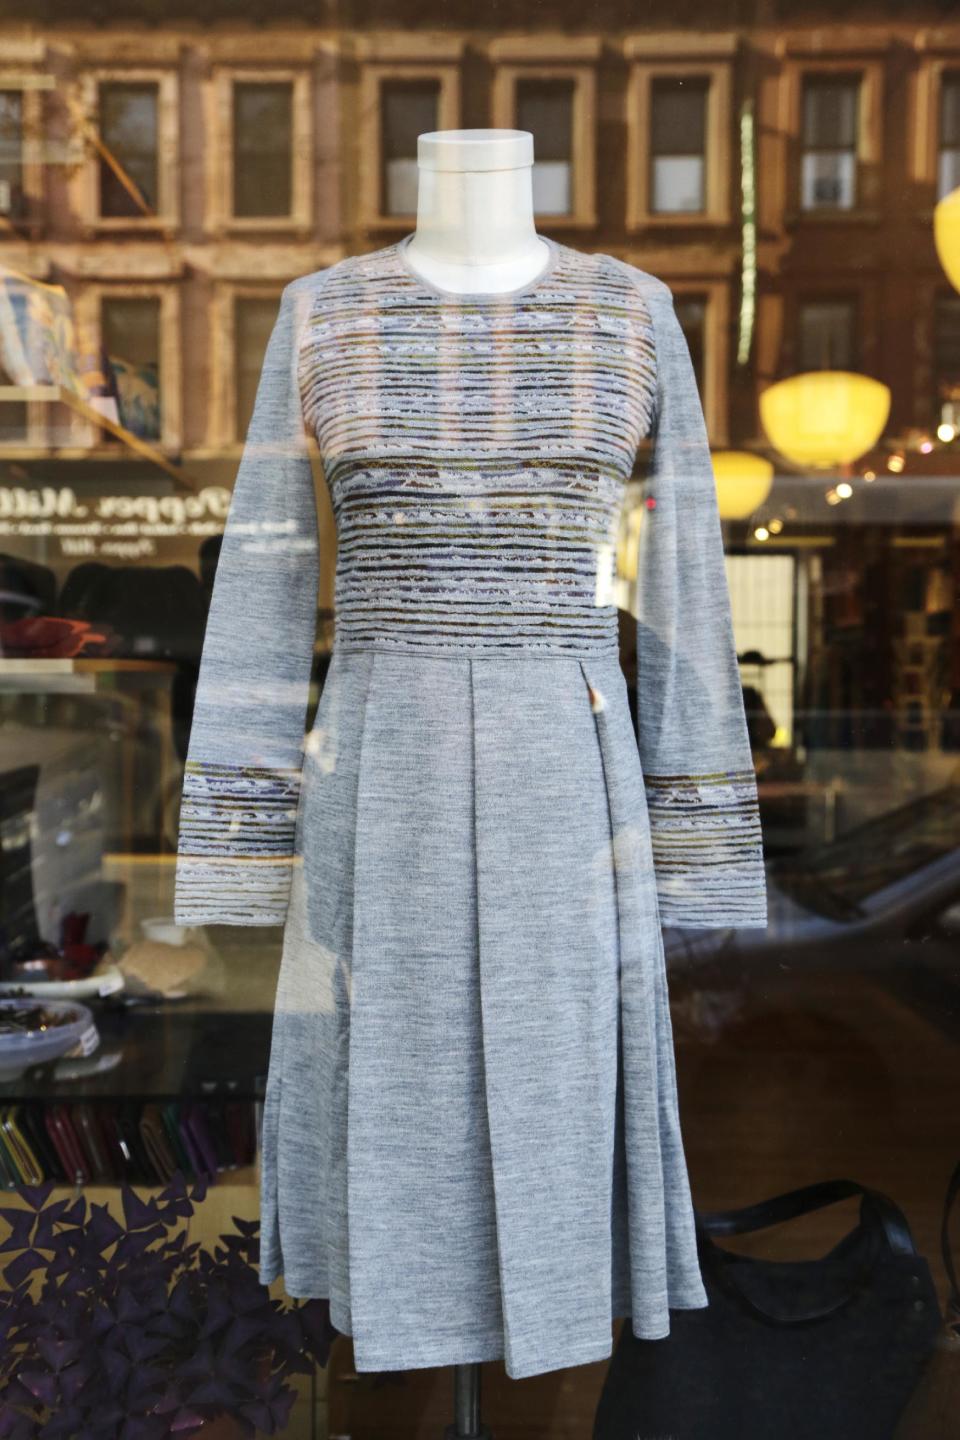 A dress hangs in a women's clothing store in the Park Slope neighborhood in the Brooklyn borough of New York that Mayor-elect Bill de Blasio calls home, Thursday, Nov. 14, 2013. Now de Blasio faces a crucial early decision: should he leave Park Slope behind to move to the mayor’s official residence, stately Gracie Mansion on Manhattan’s Upper East Side? (AP Photo/Mark Lennihan)